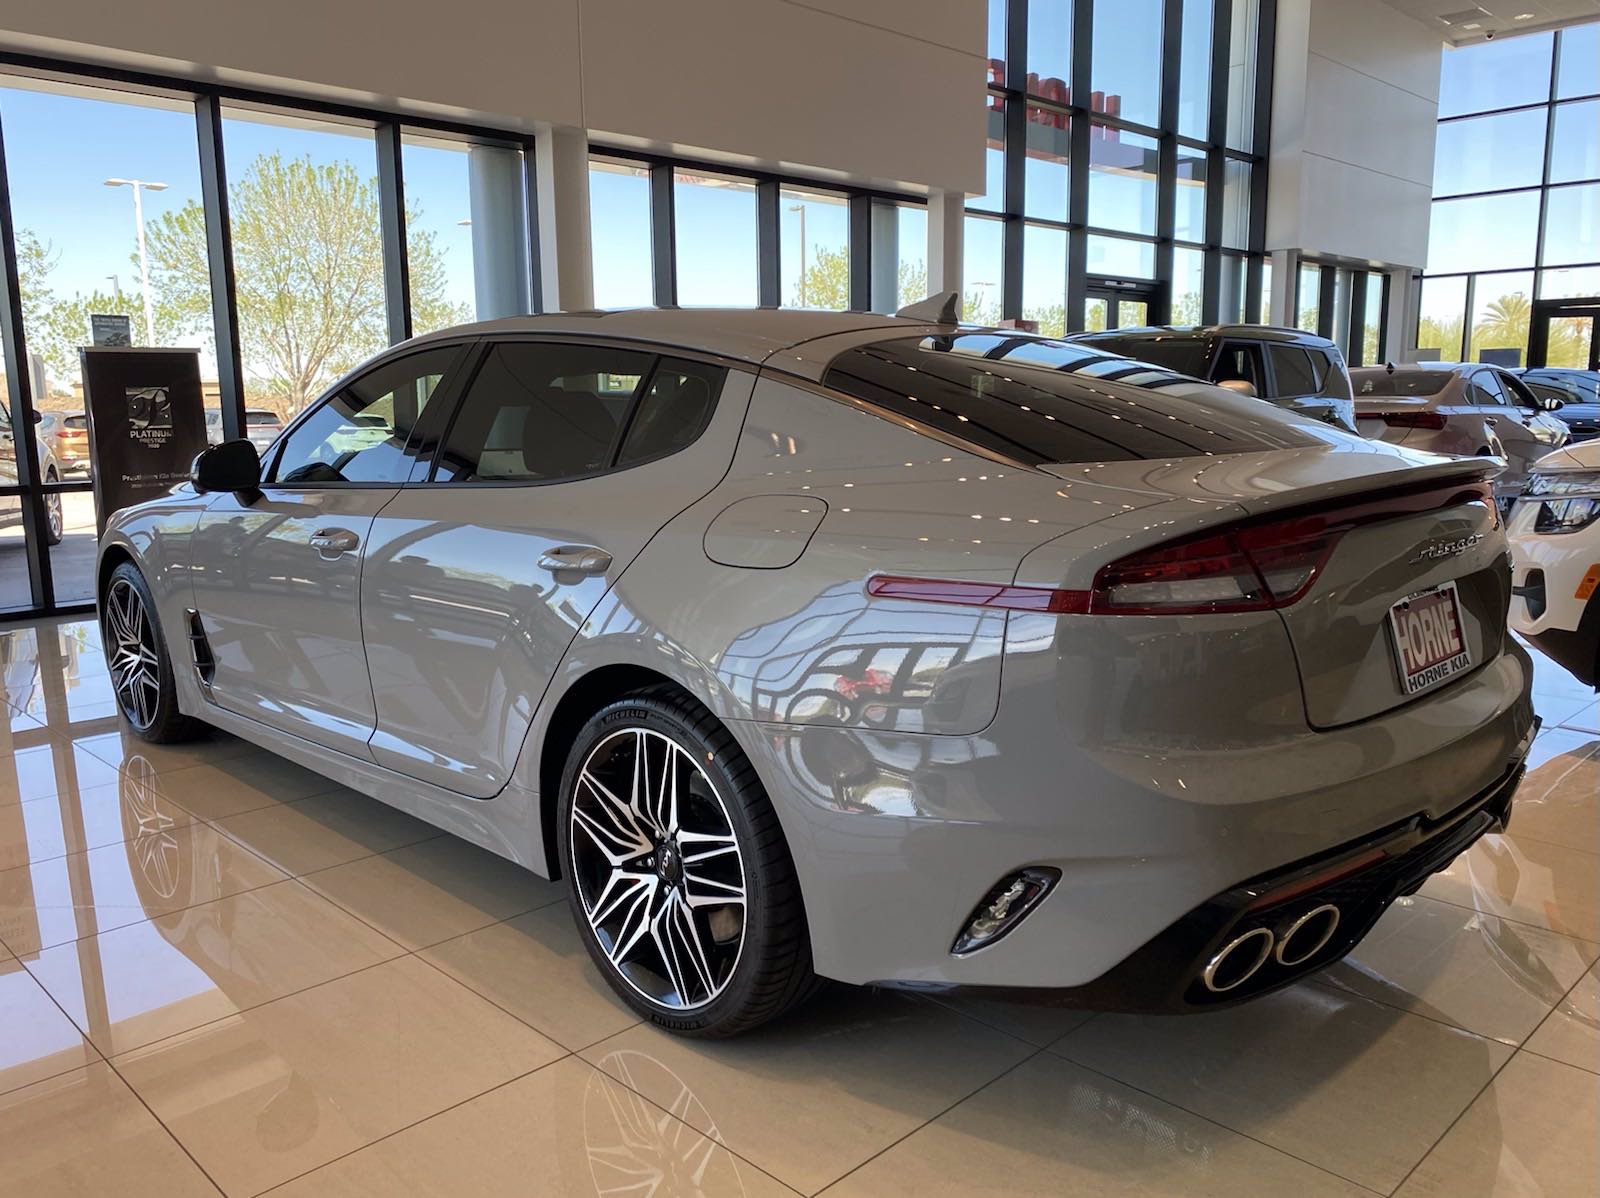 UhOh 2022 Kia Stinger Already Revealed And Available At U.S. And